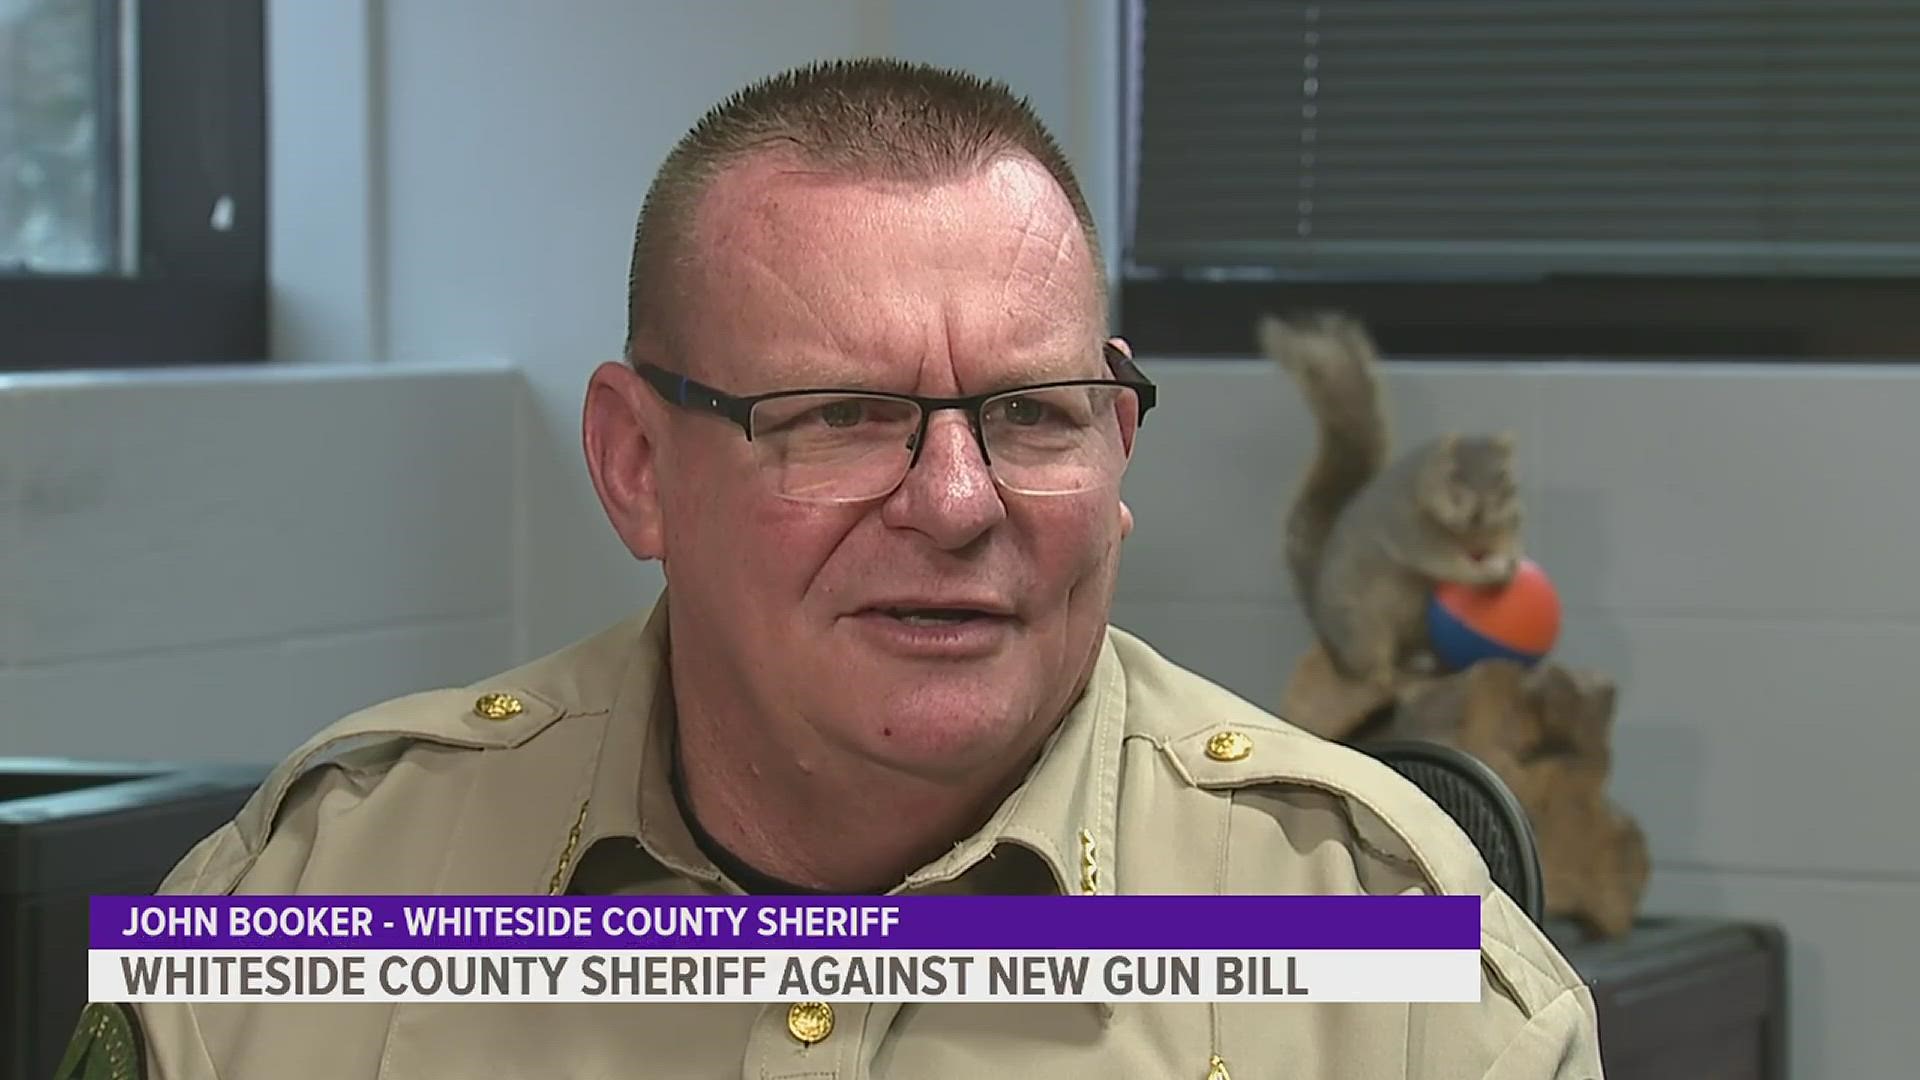 Whiteside County Sheriff John Booker told News 8's Cesar Sanchez that he won't be checking on gun owners to see if their weapons have been registered with the state.